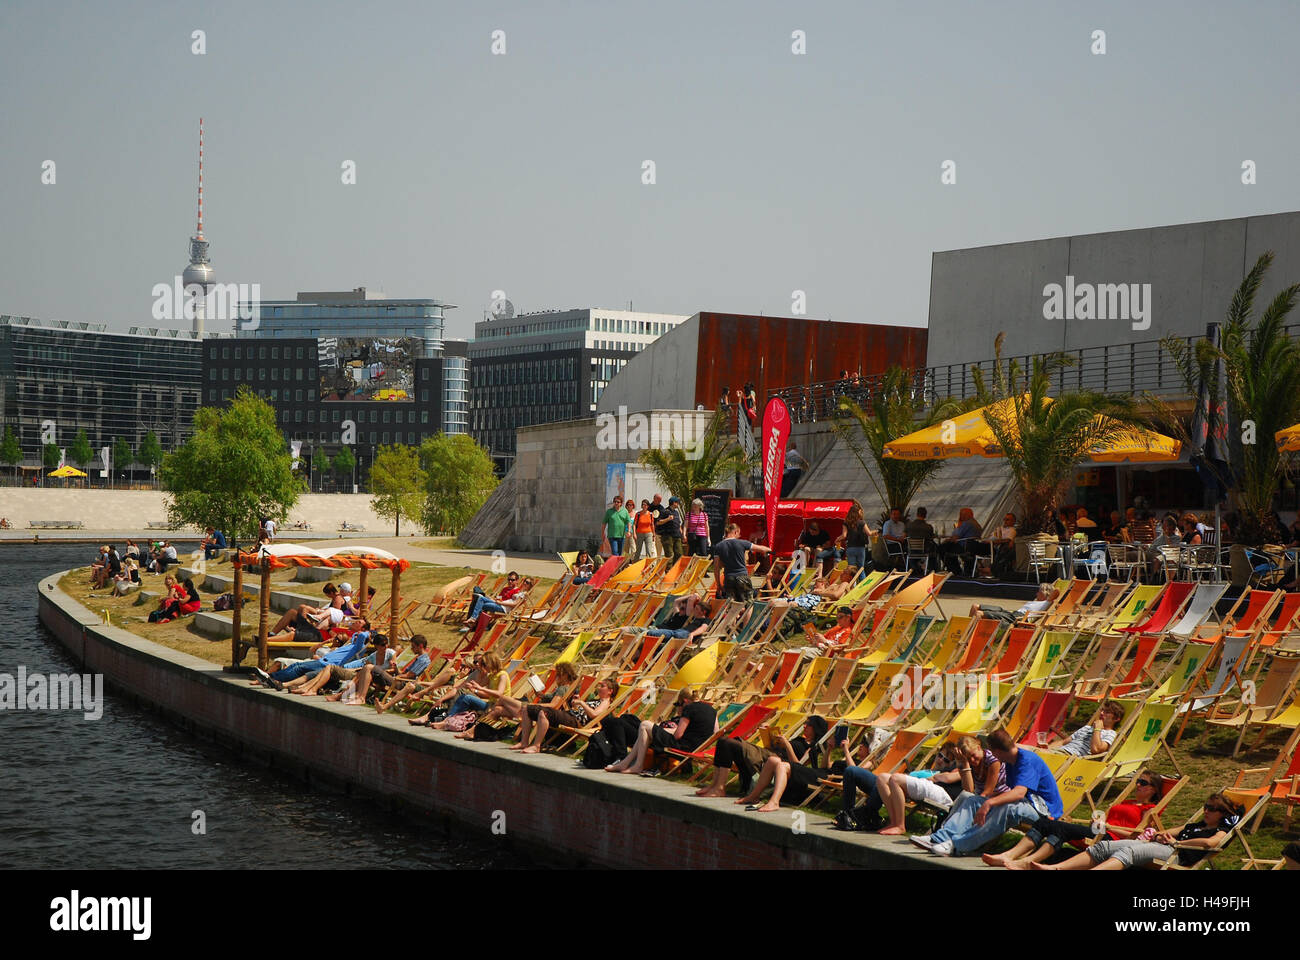 Germany, Berlin, Spree bow, beach cafe, deck chairs, people, town, capital, the Spree, river, riverside, summer, solar bath, guests, tourists, sun benches, take it easy, recreation, rest, leisure time, Stock Photo